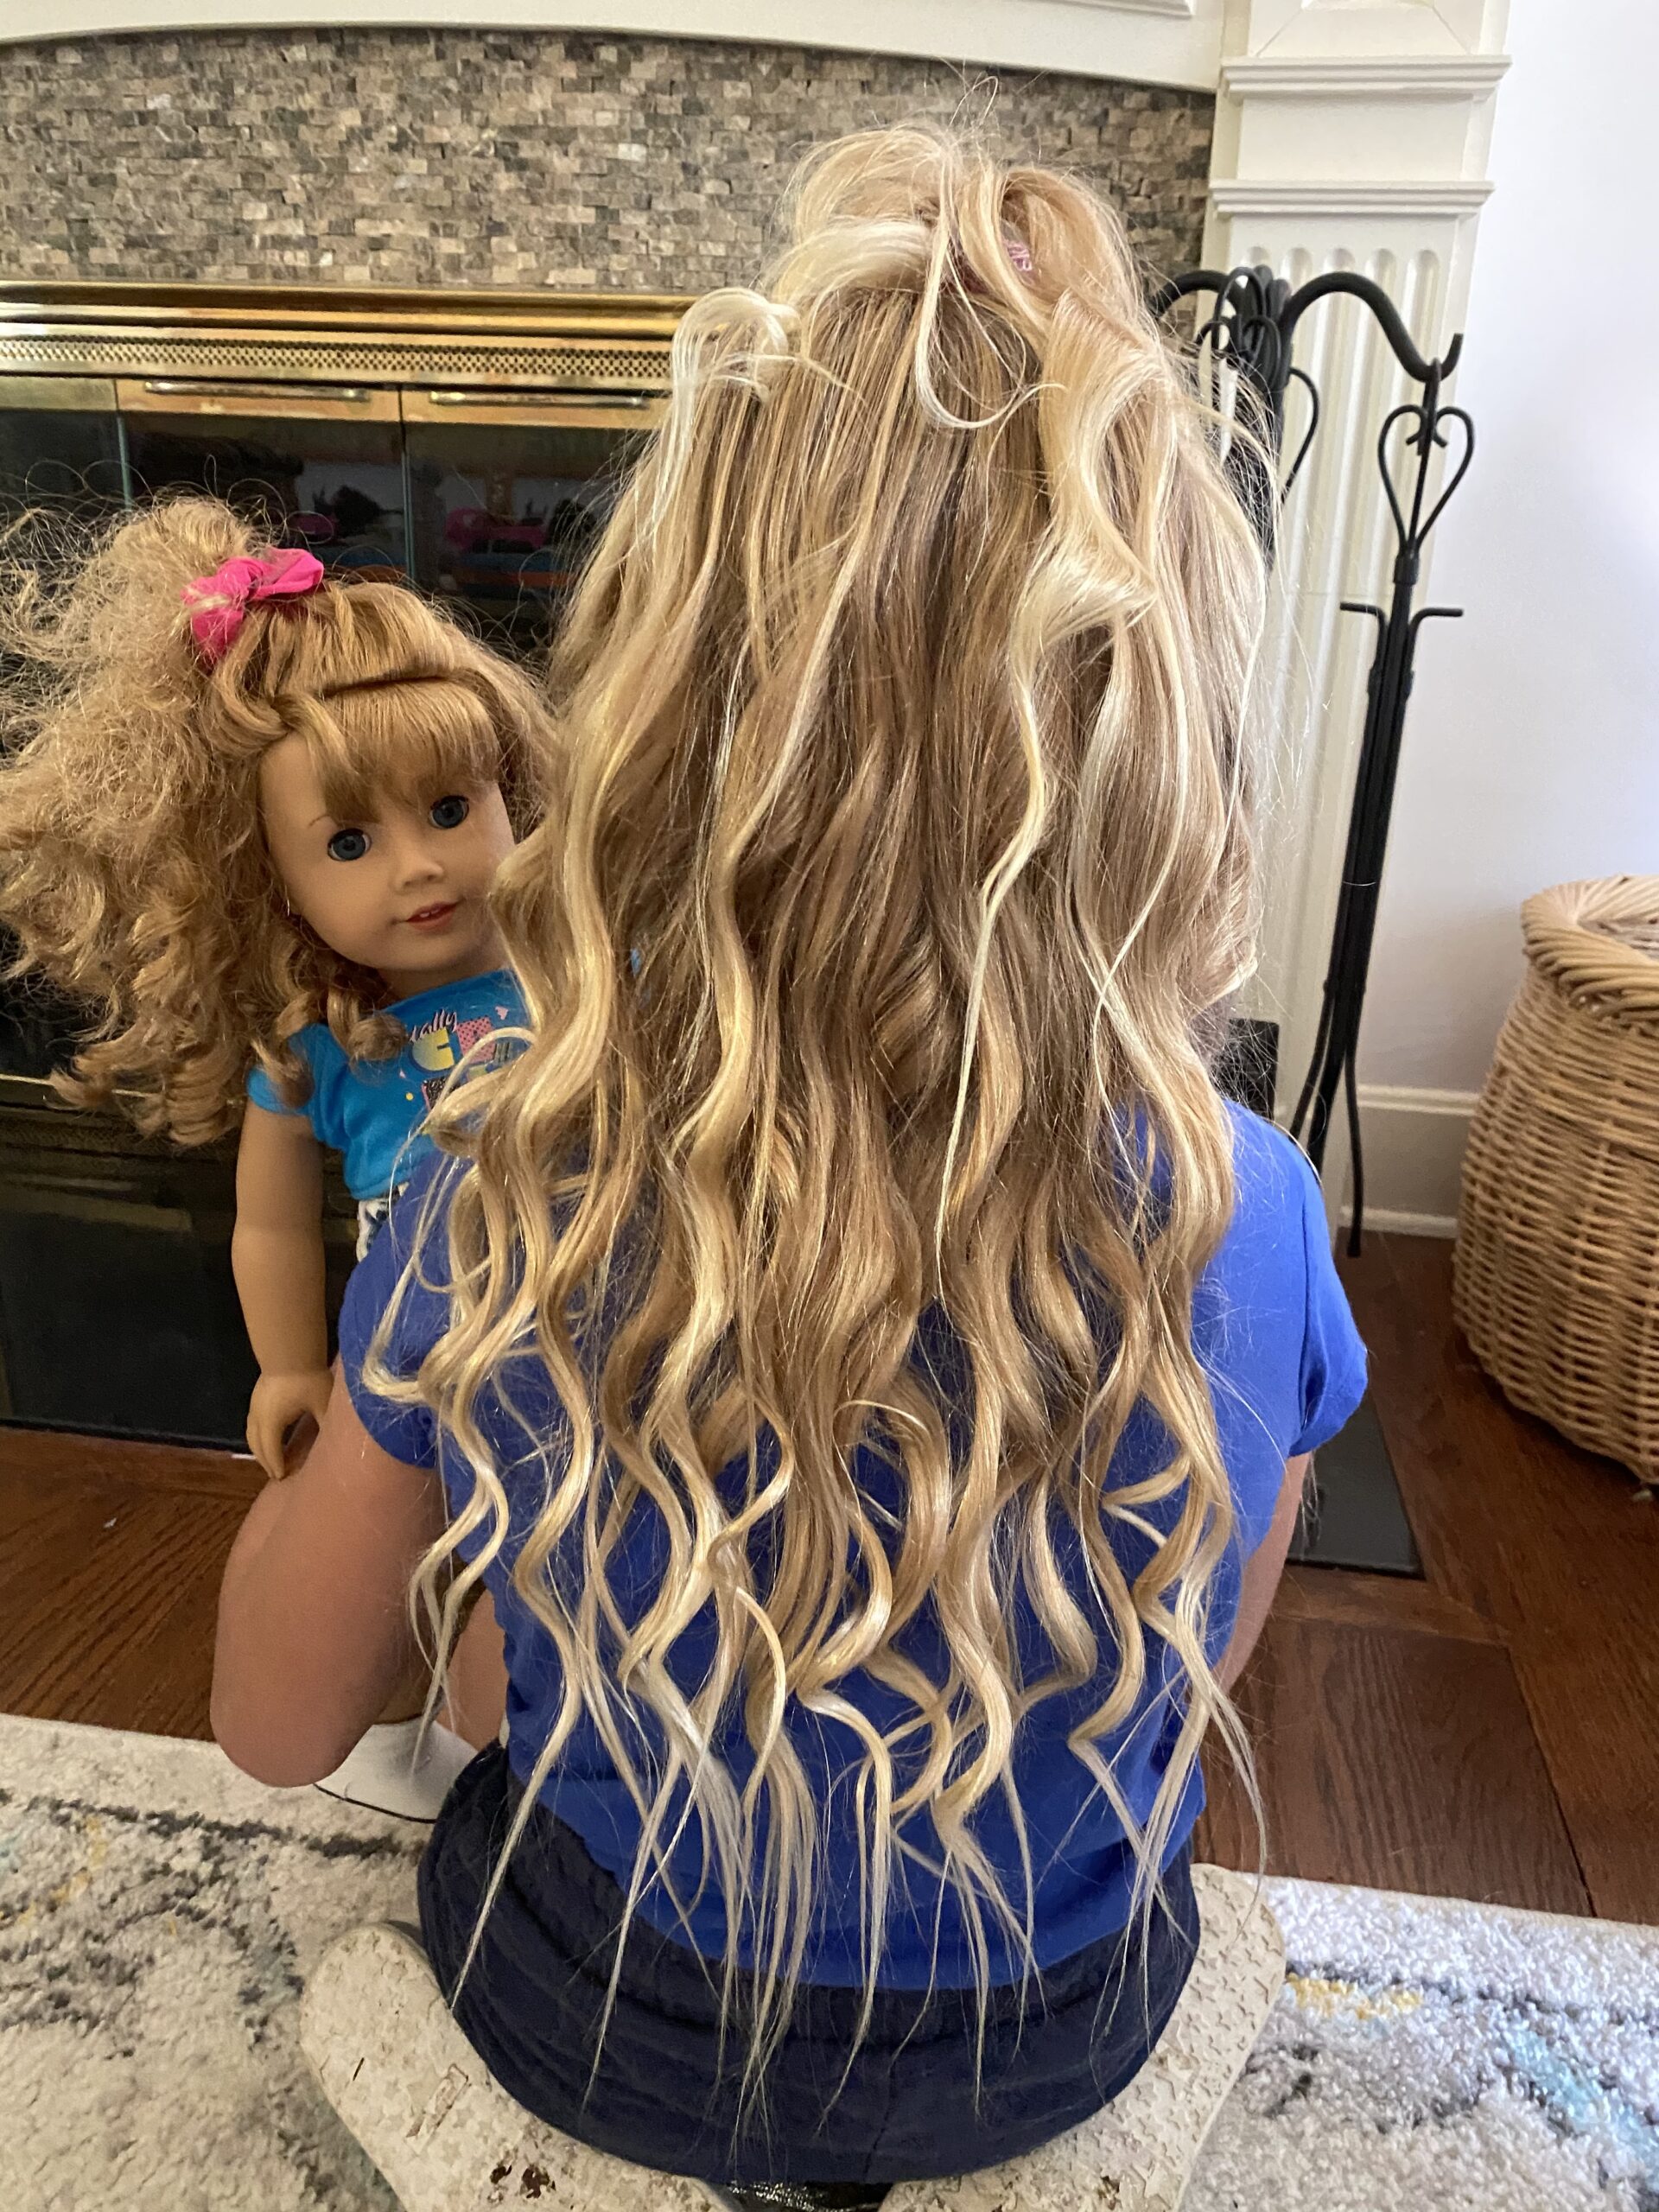 American girl doll hairstyles  Sloppy pigtails camryn  Facebook